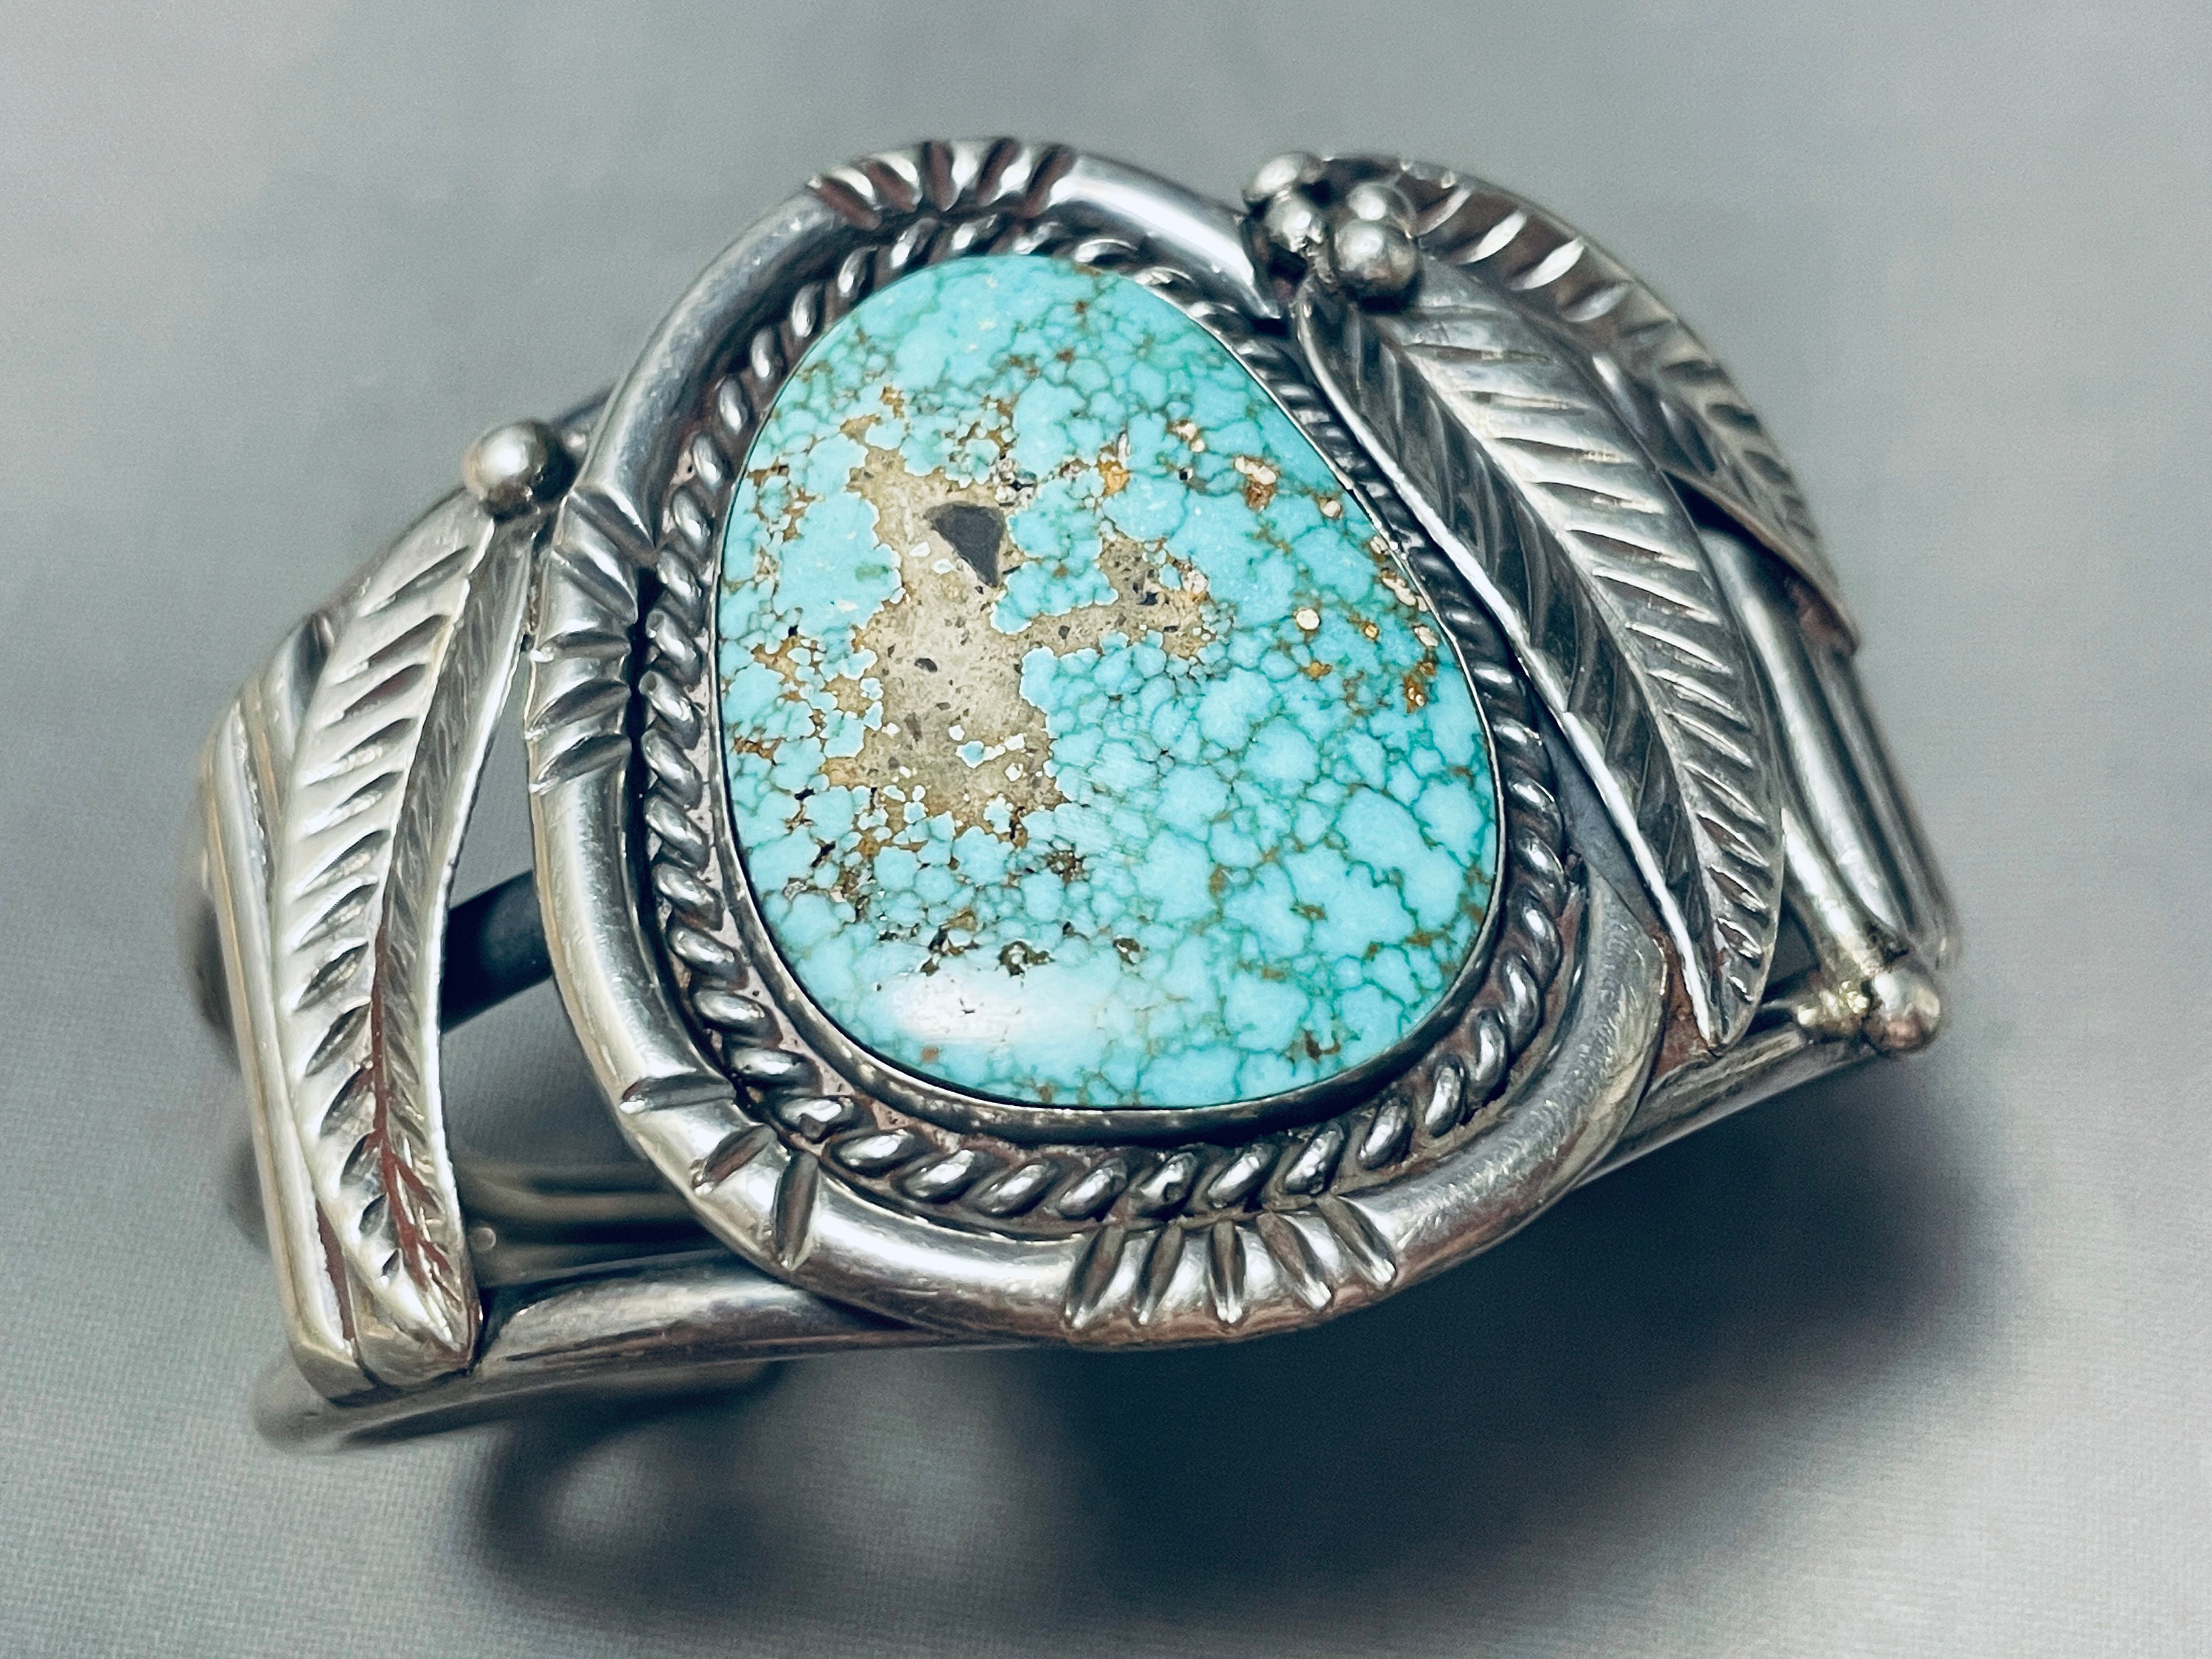 Native American Silver Bellsold for 393.00, it's awesome